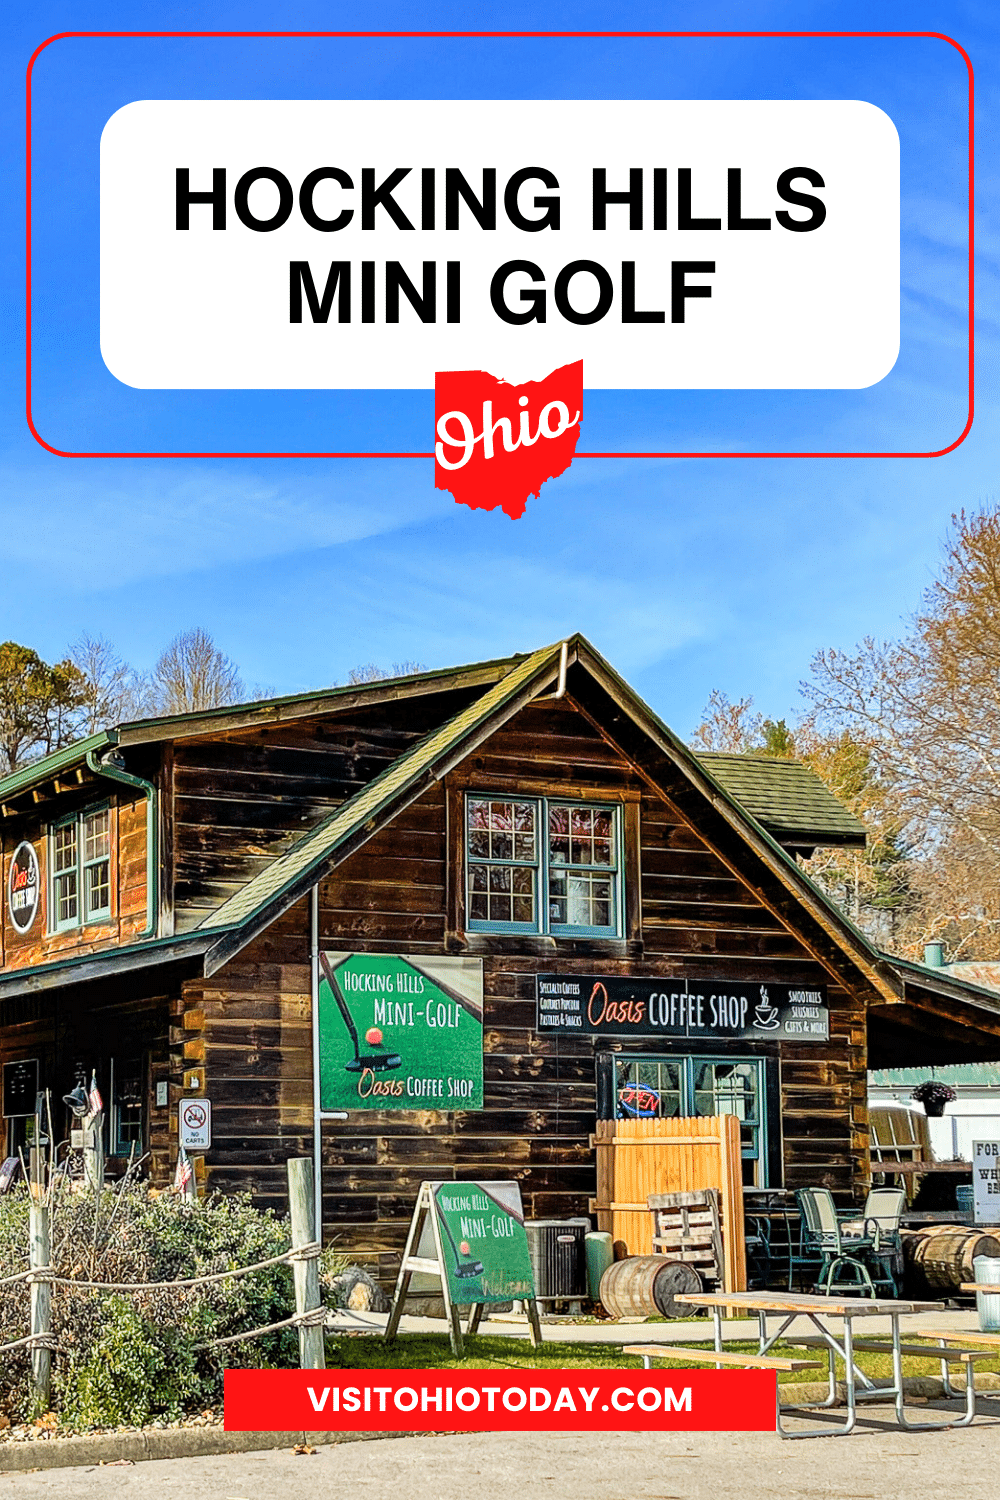 Hocking Hills Mini Golf is a miniature golf course located in the Rockbridge area of Hocking Hills. If you are looking for an activity to pass the time, Hocking Hills Mini Golf is 18 holes of challenging fun!